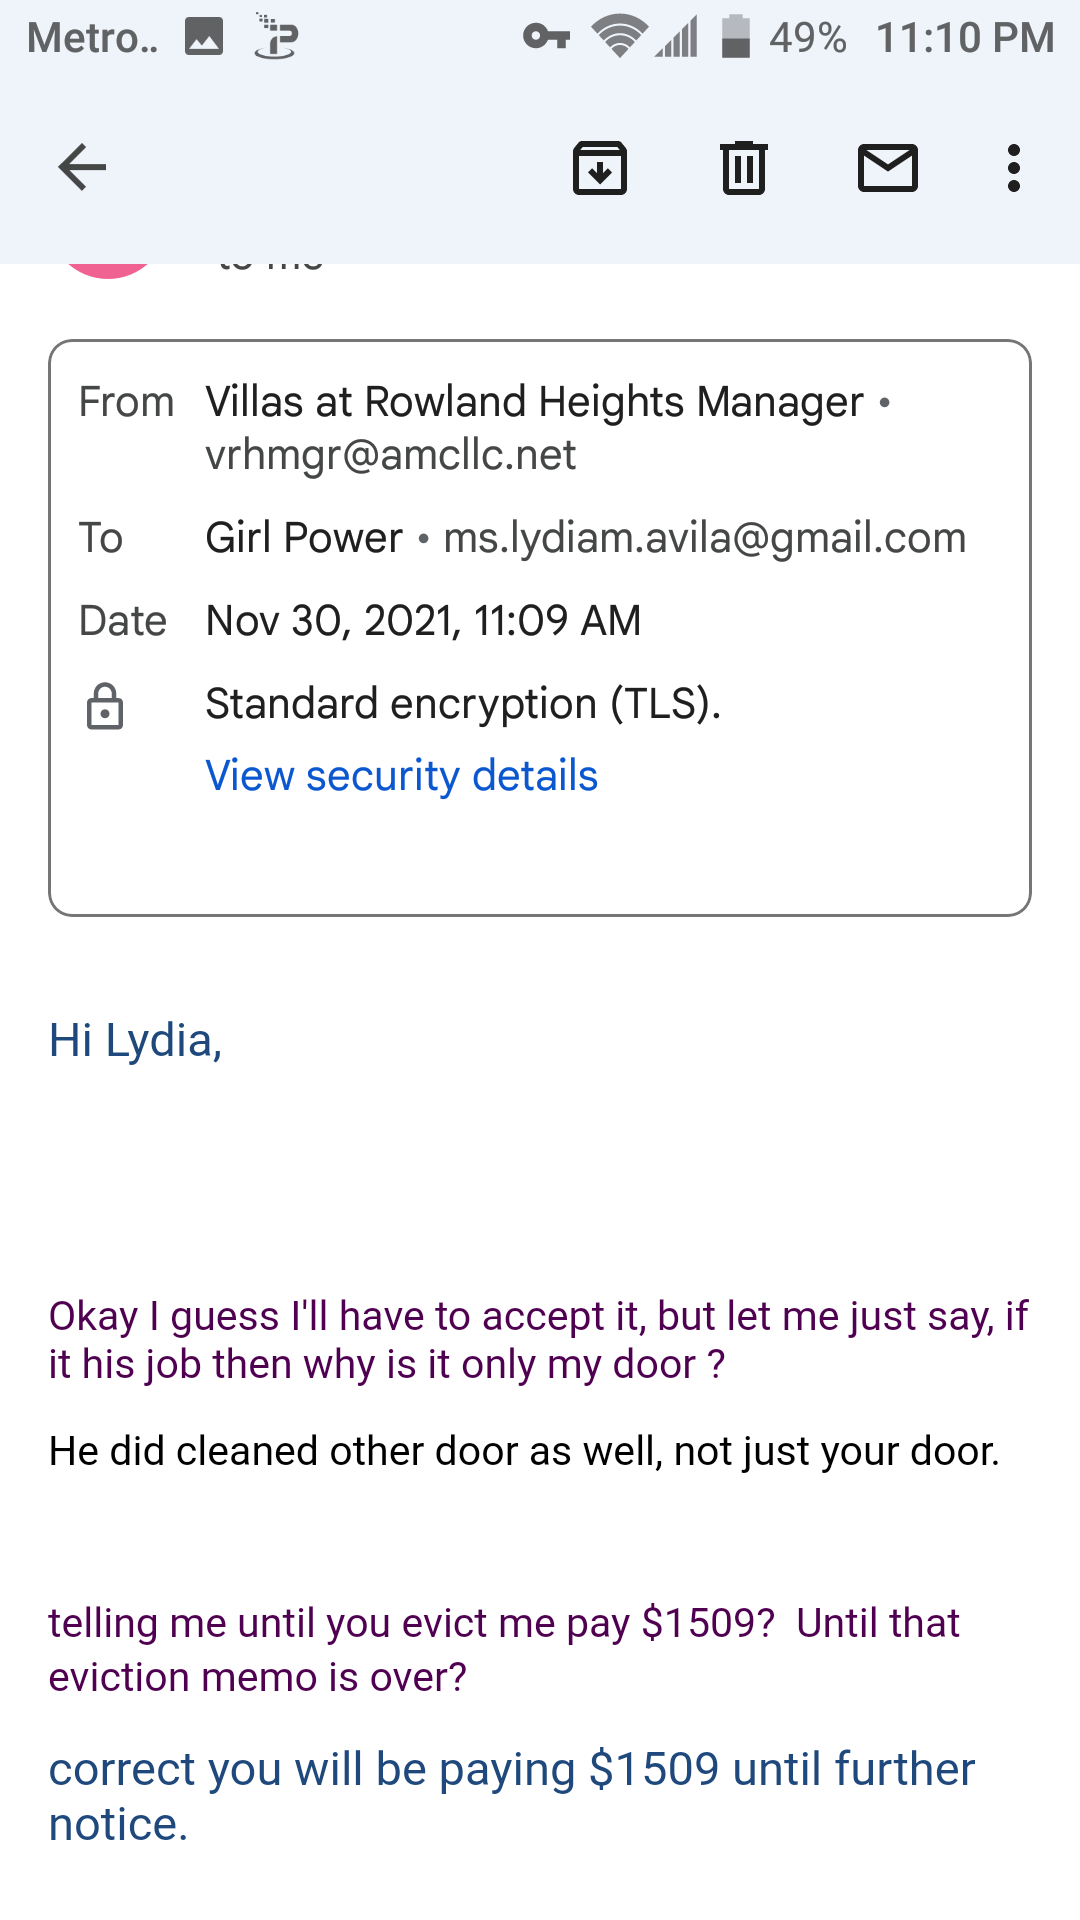 emailed threatening me with eviction